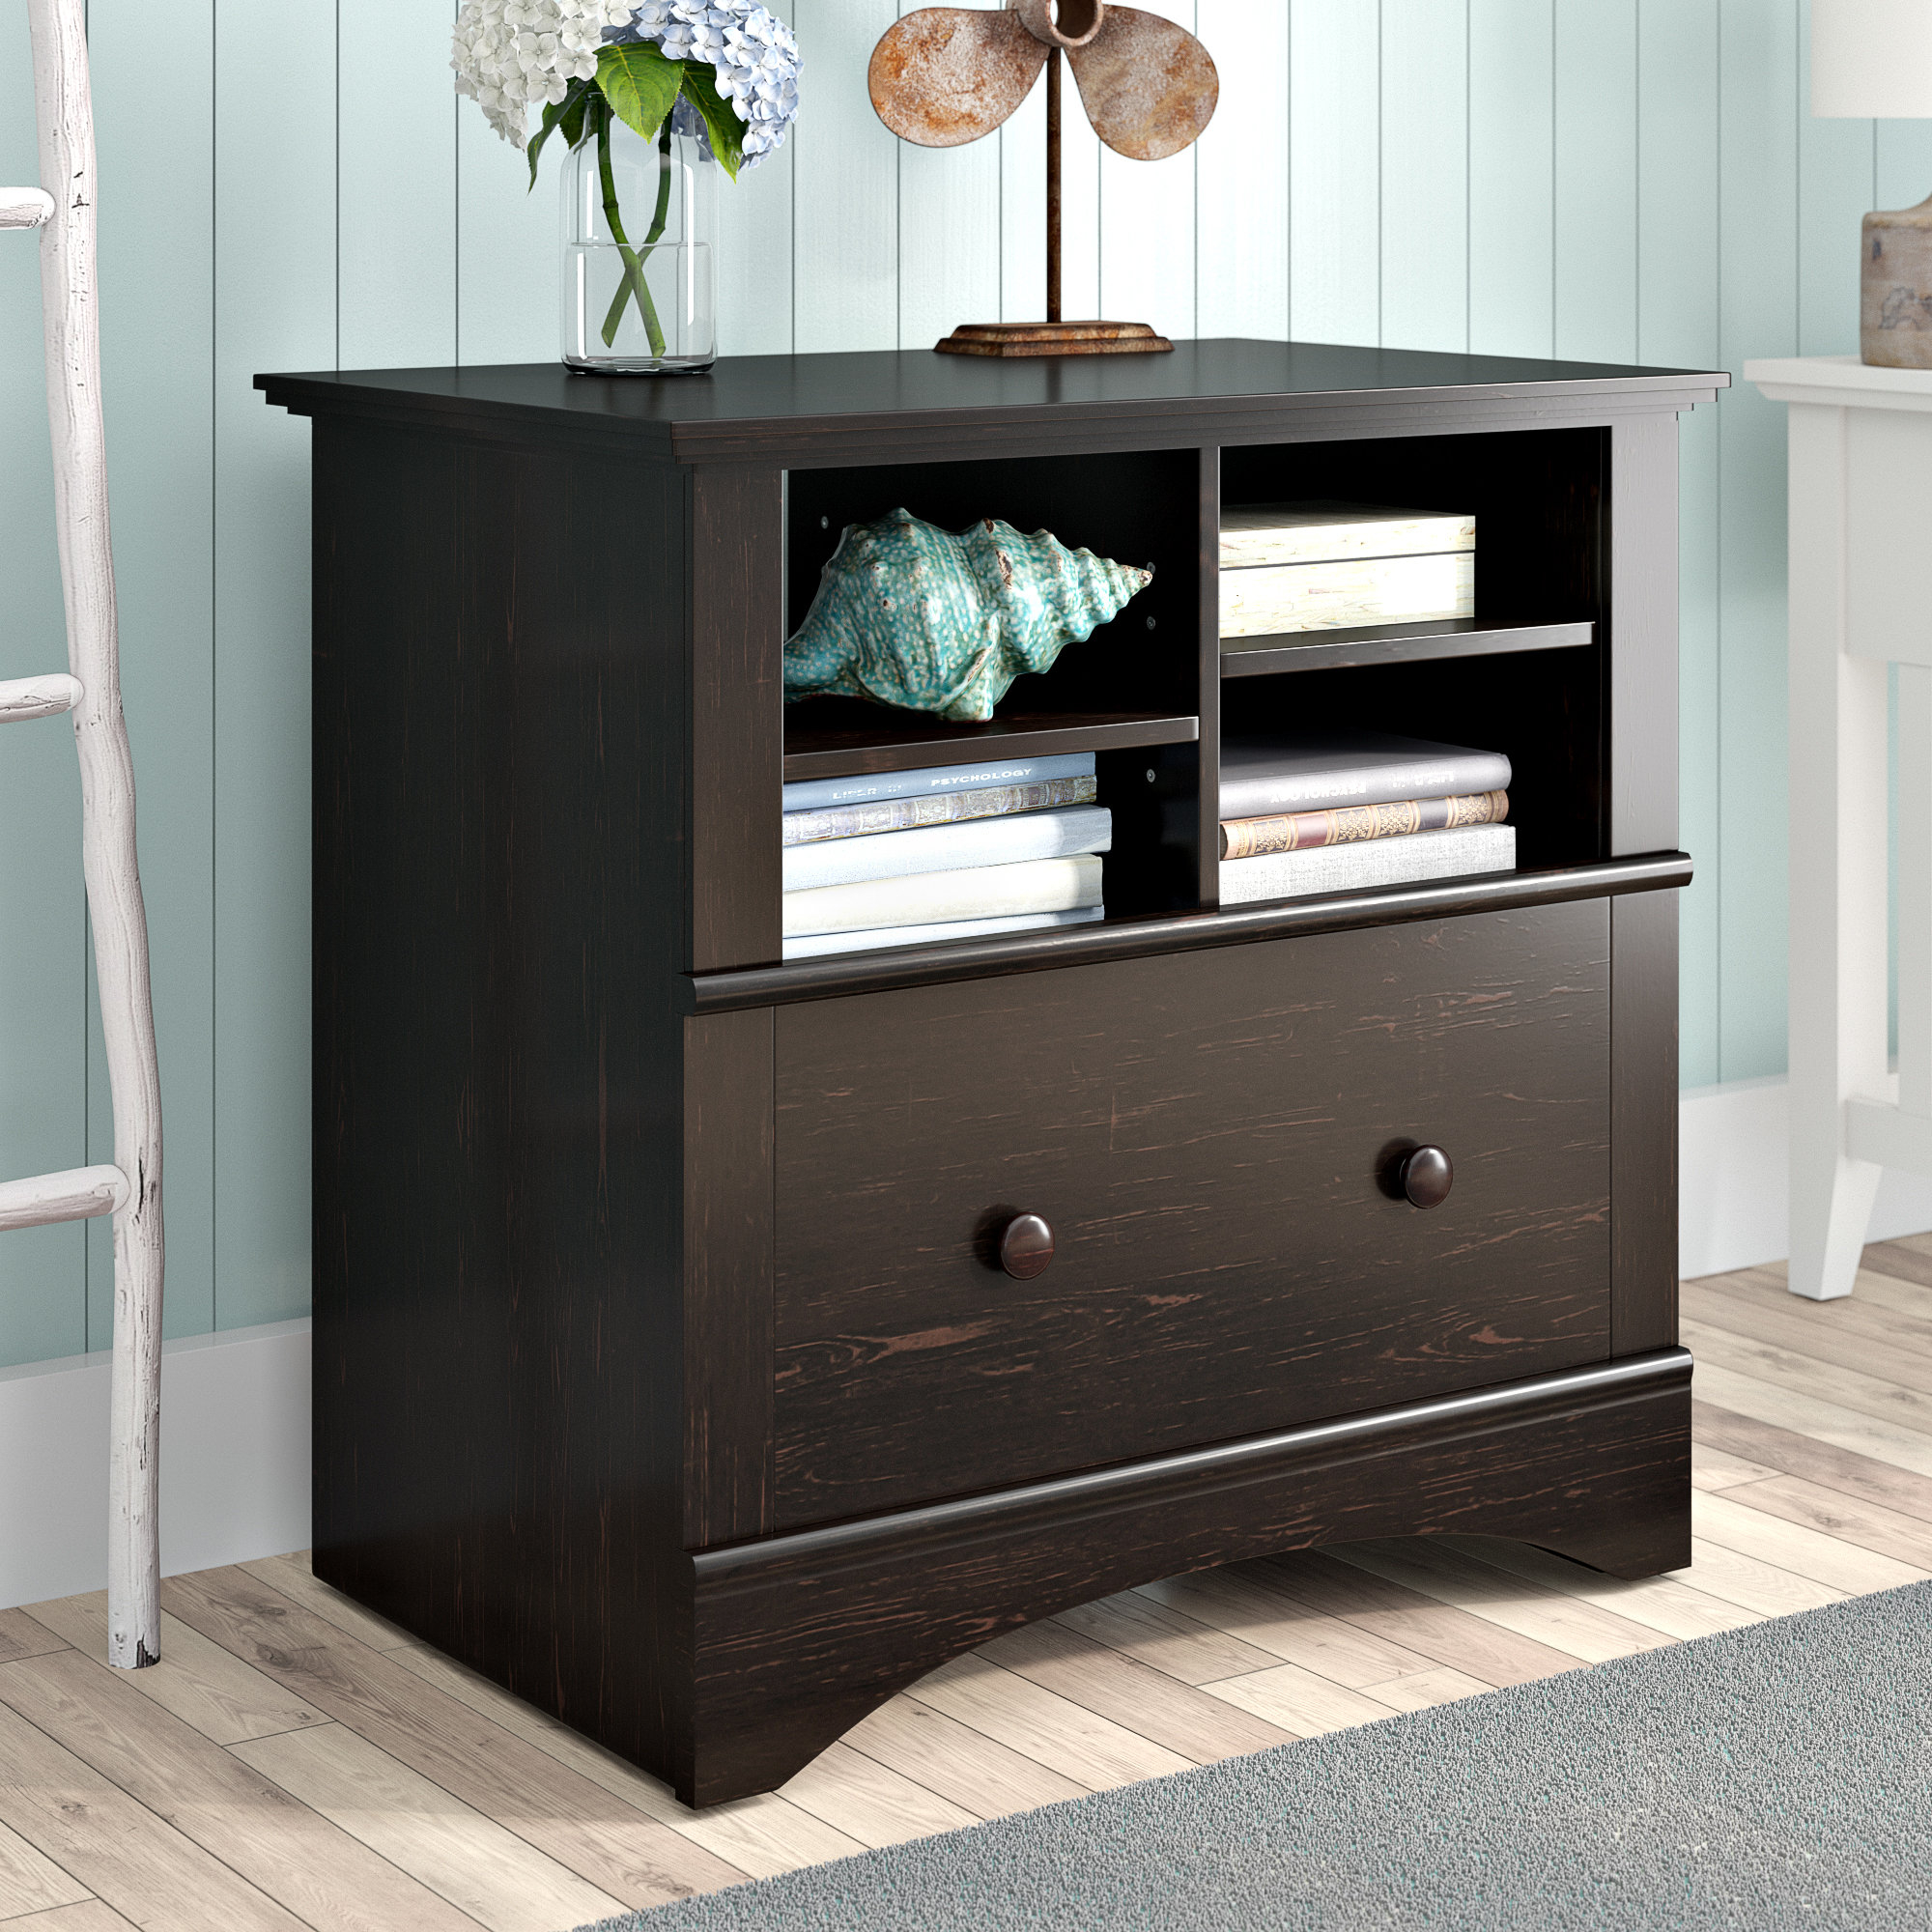 Beachcrest Home Pinellas 1 Drawer Lateral Filing Cabinet Reviews throughout proportions 2000 X 2000